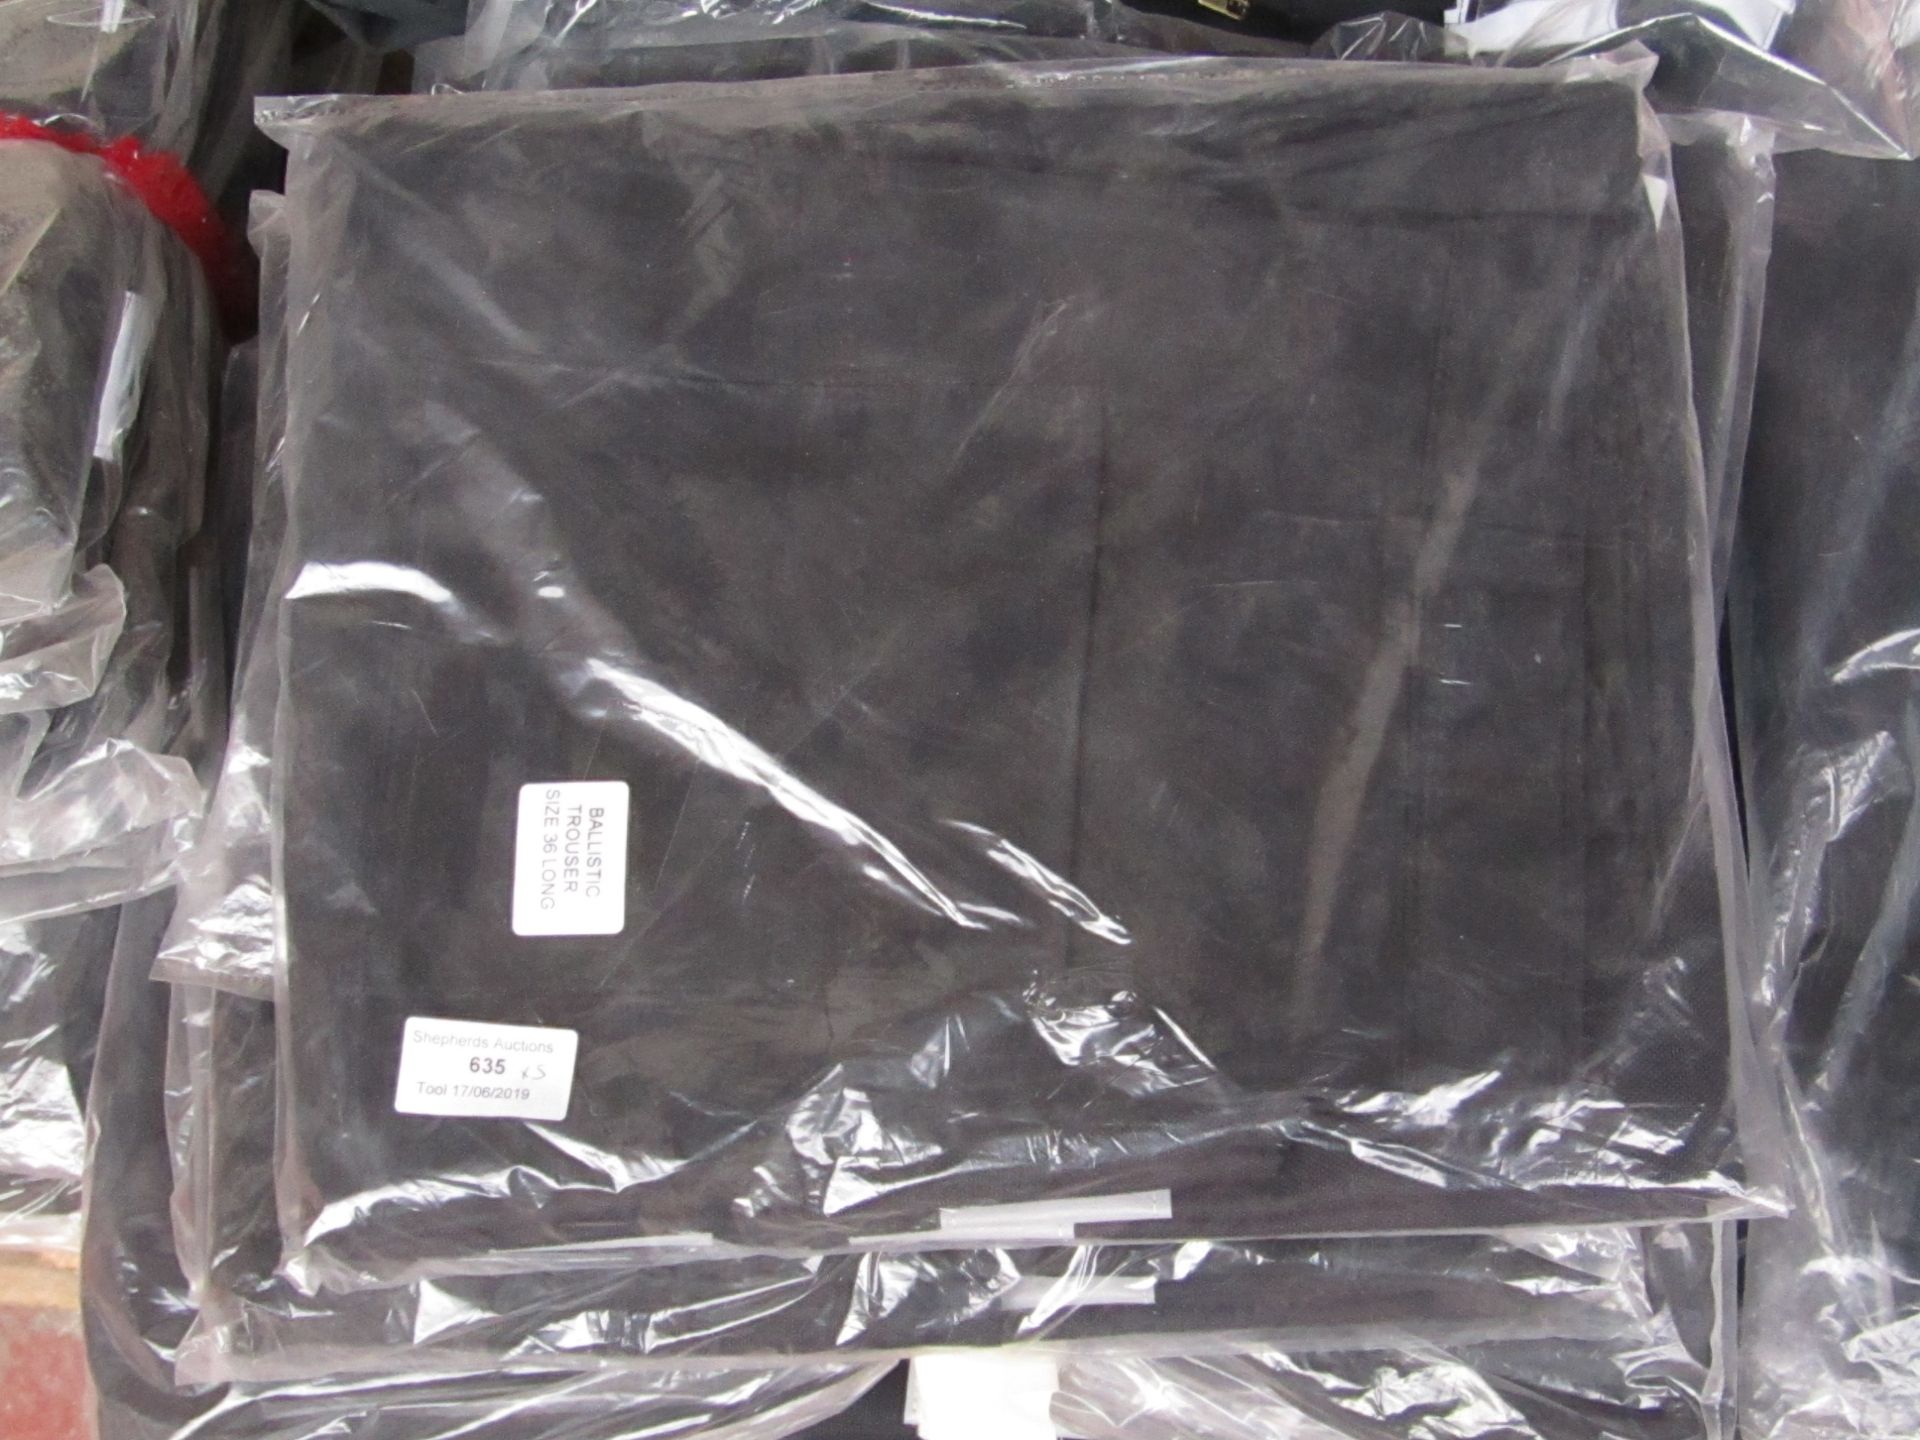 5x Ballistic trousers, size 36L, new and packaged.